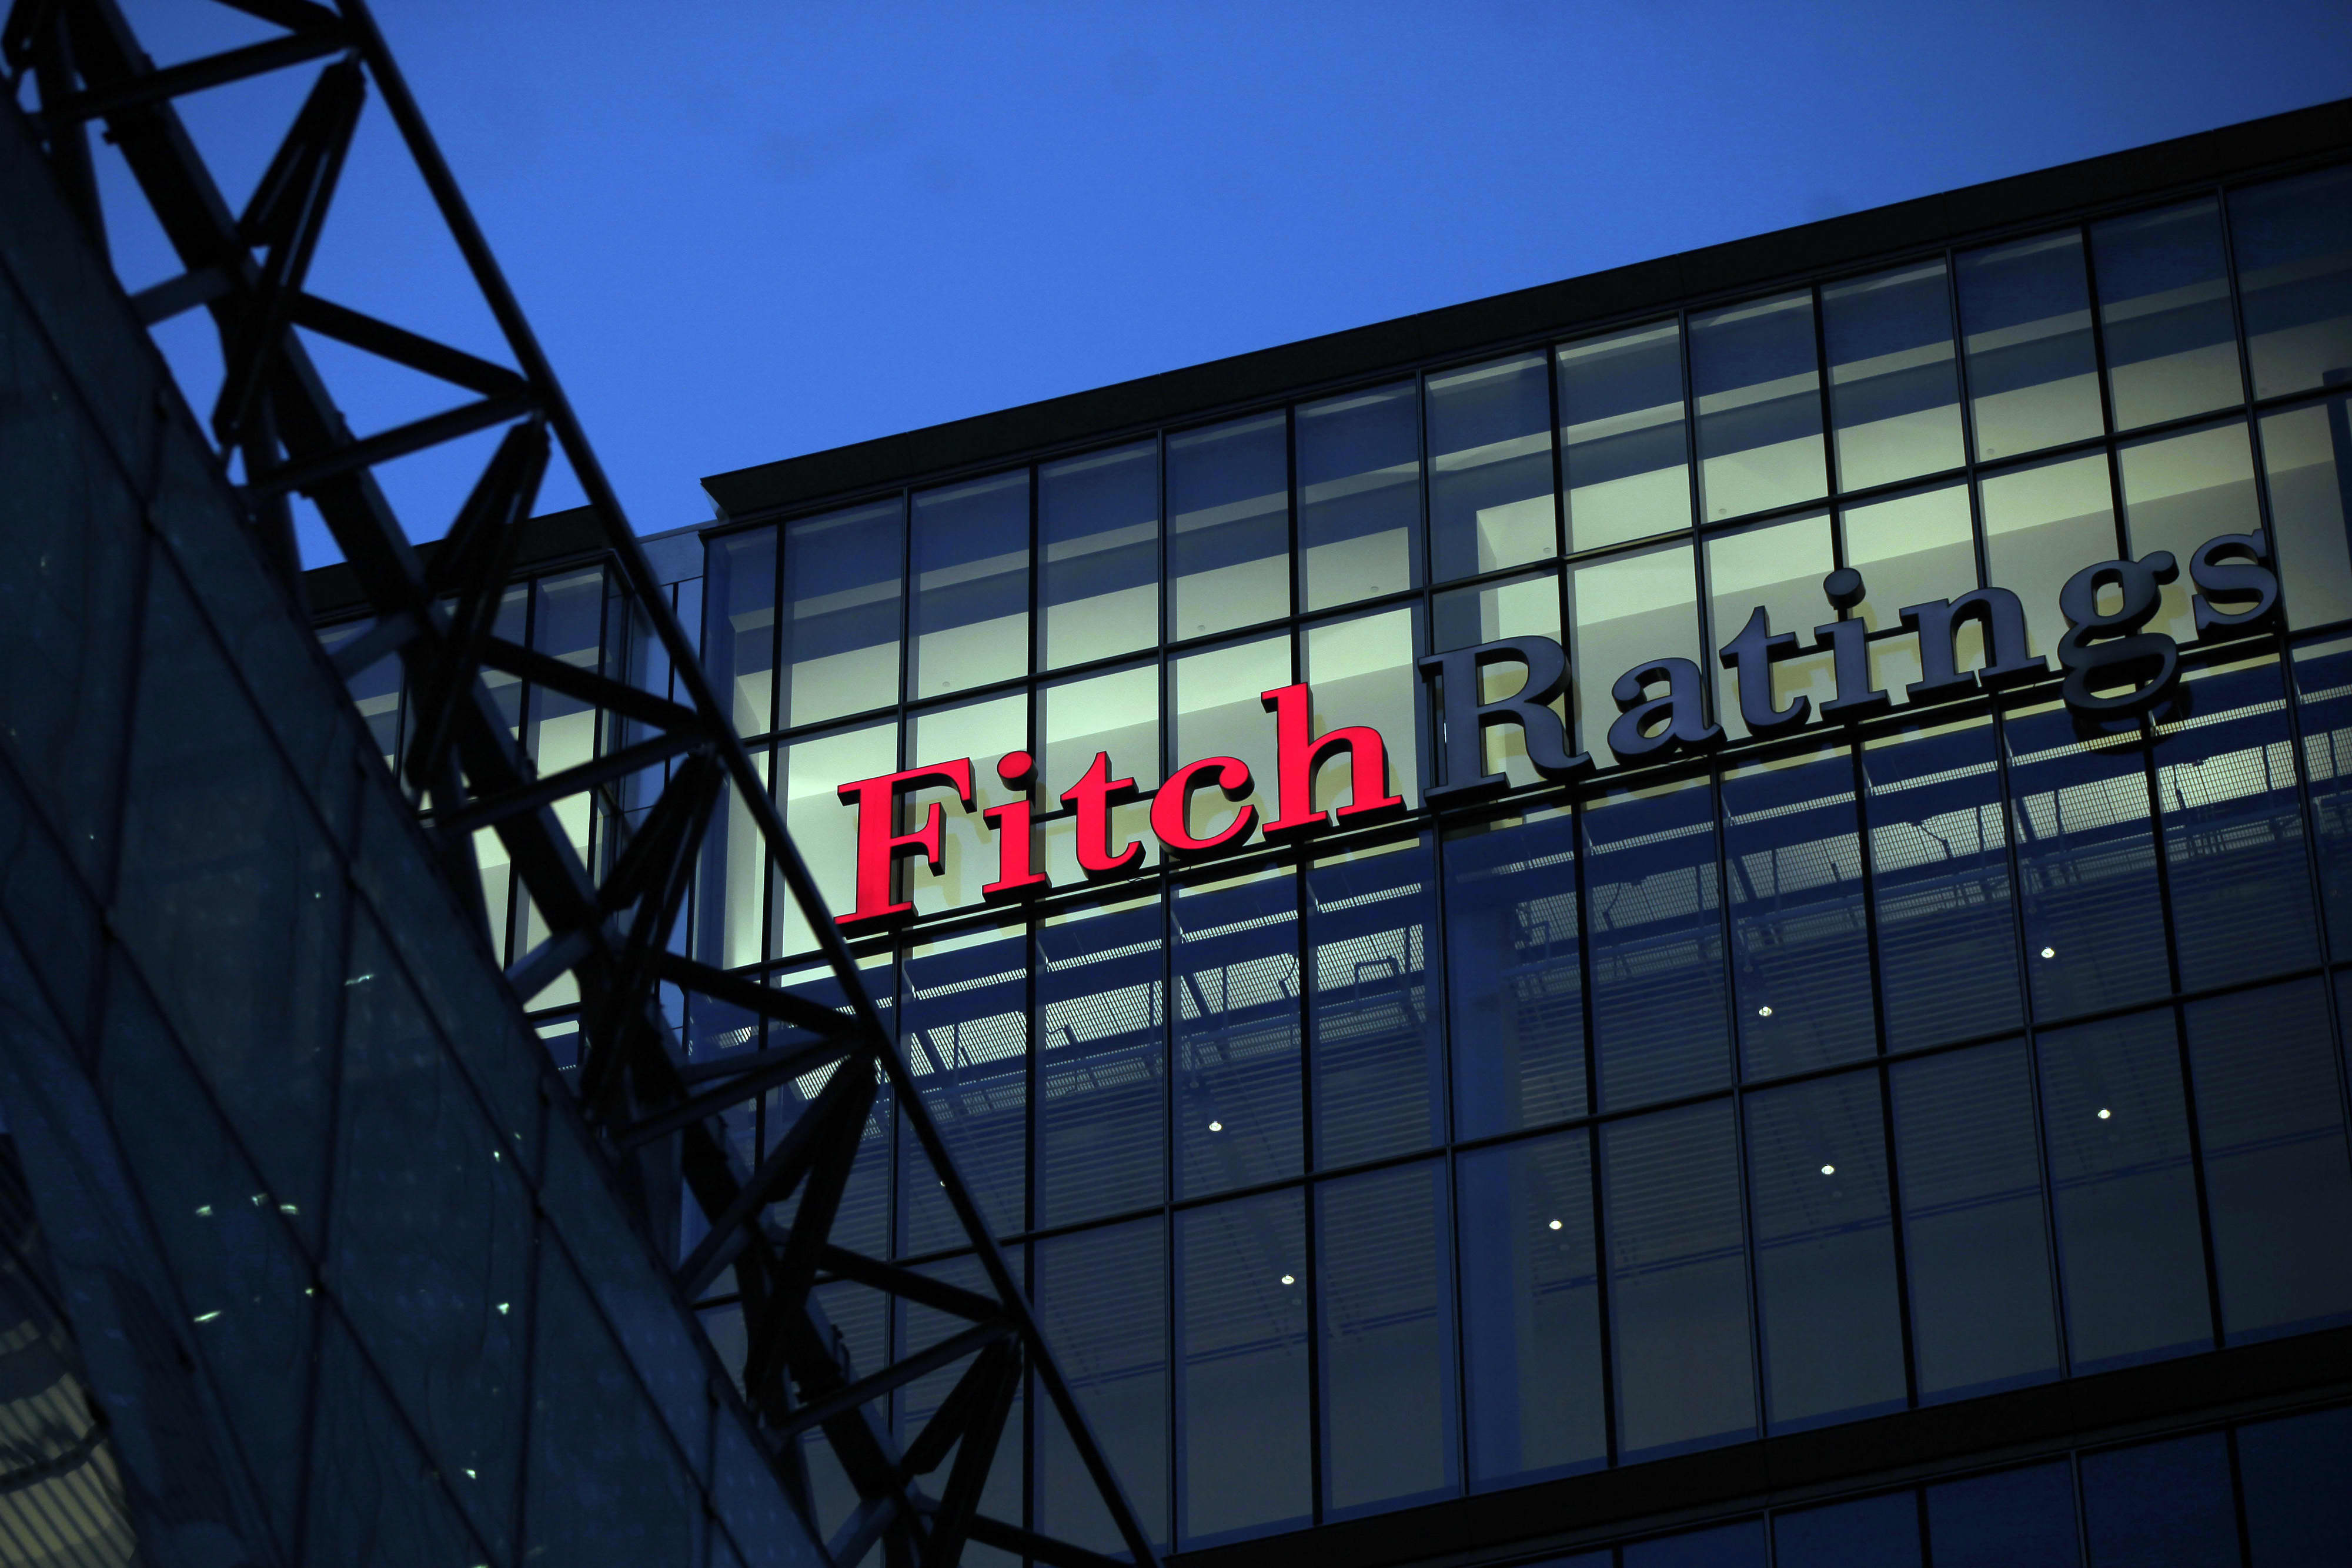 Fitch says banks in Asia are resilient to risks seen in U.S. bank failures